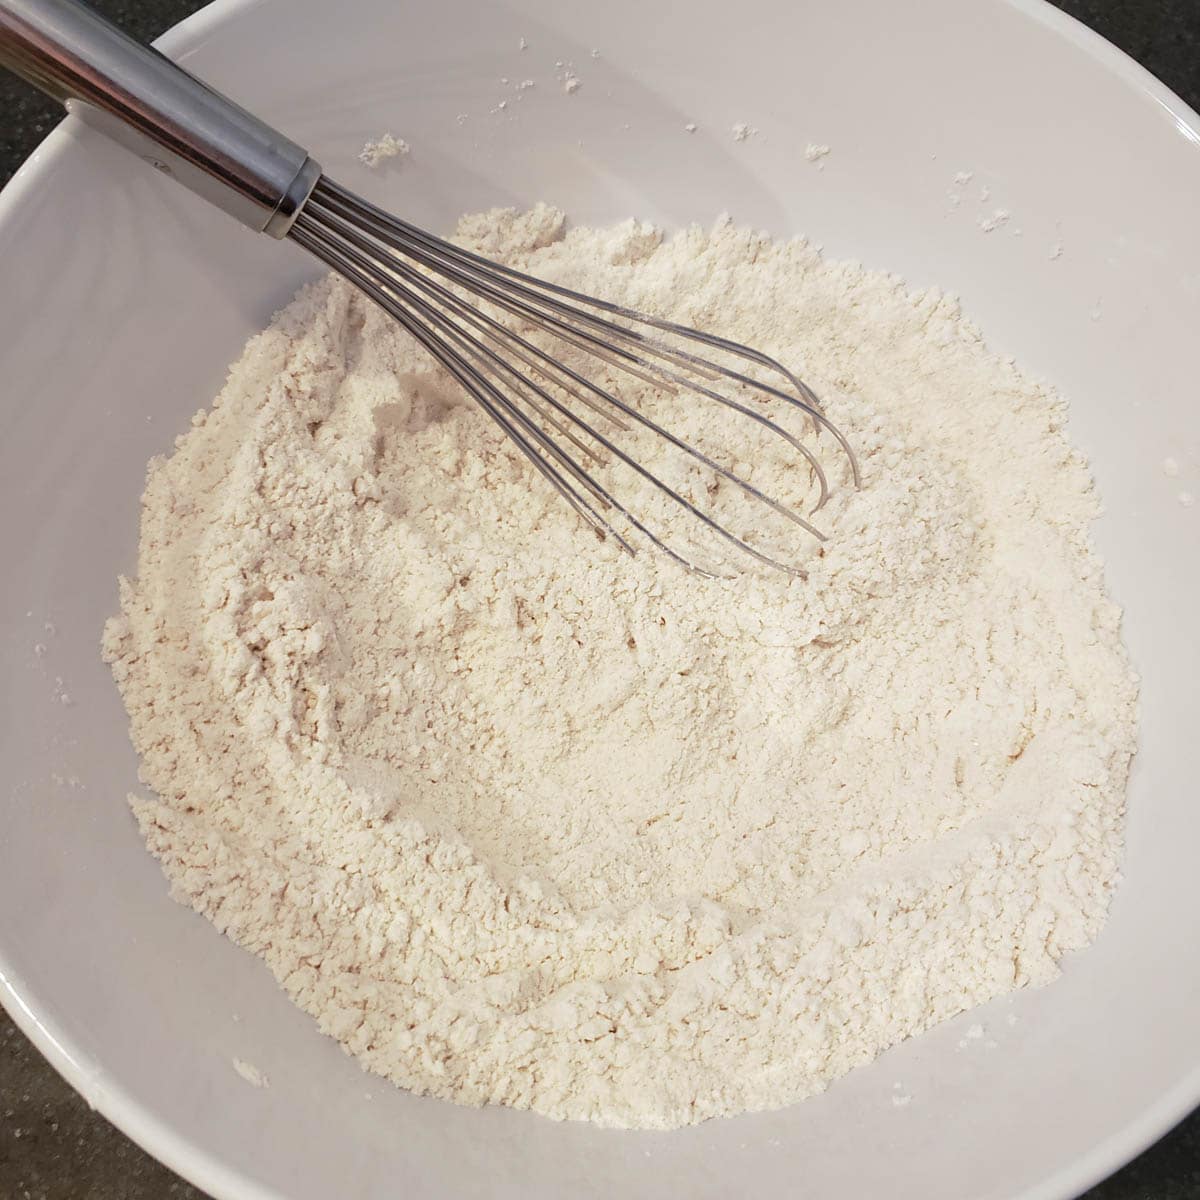 Dry ingredients in a mixing bowl with whisk.